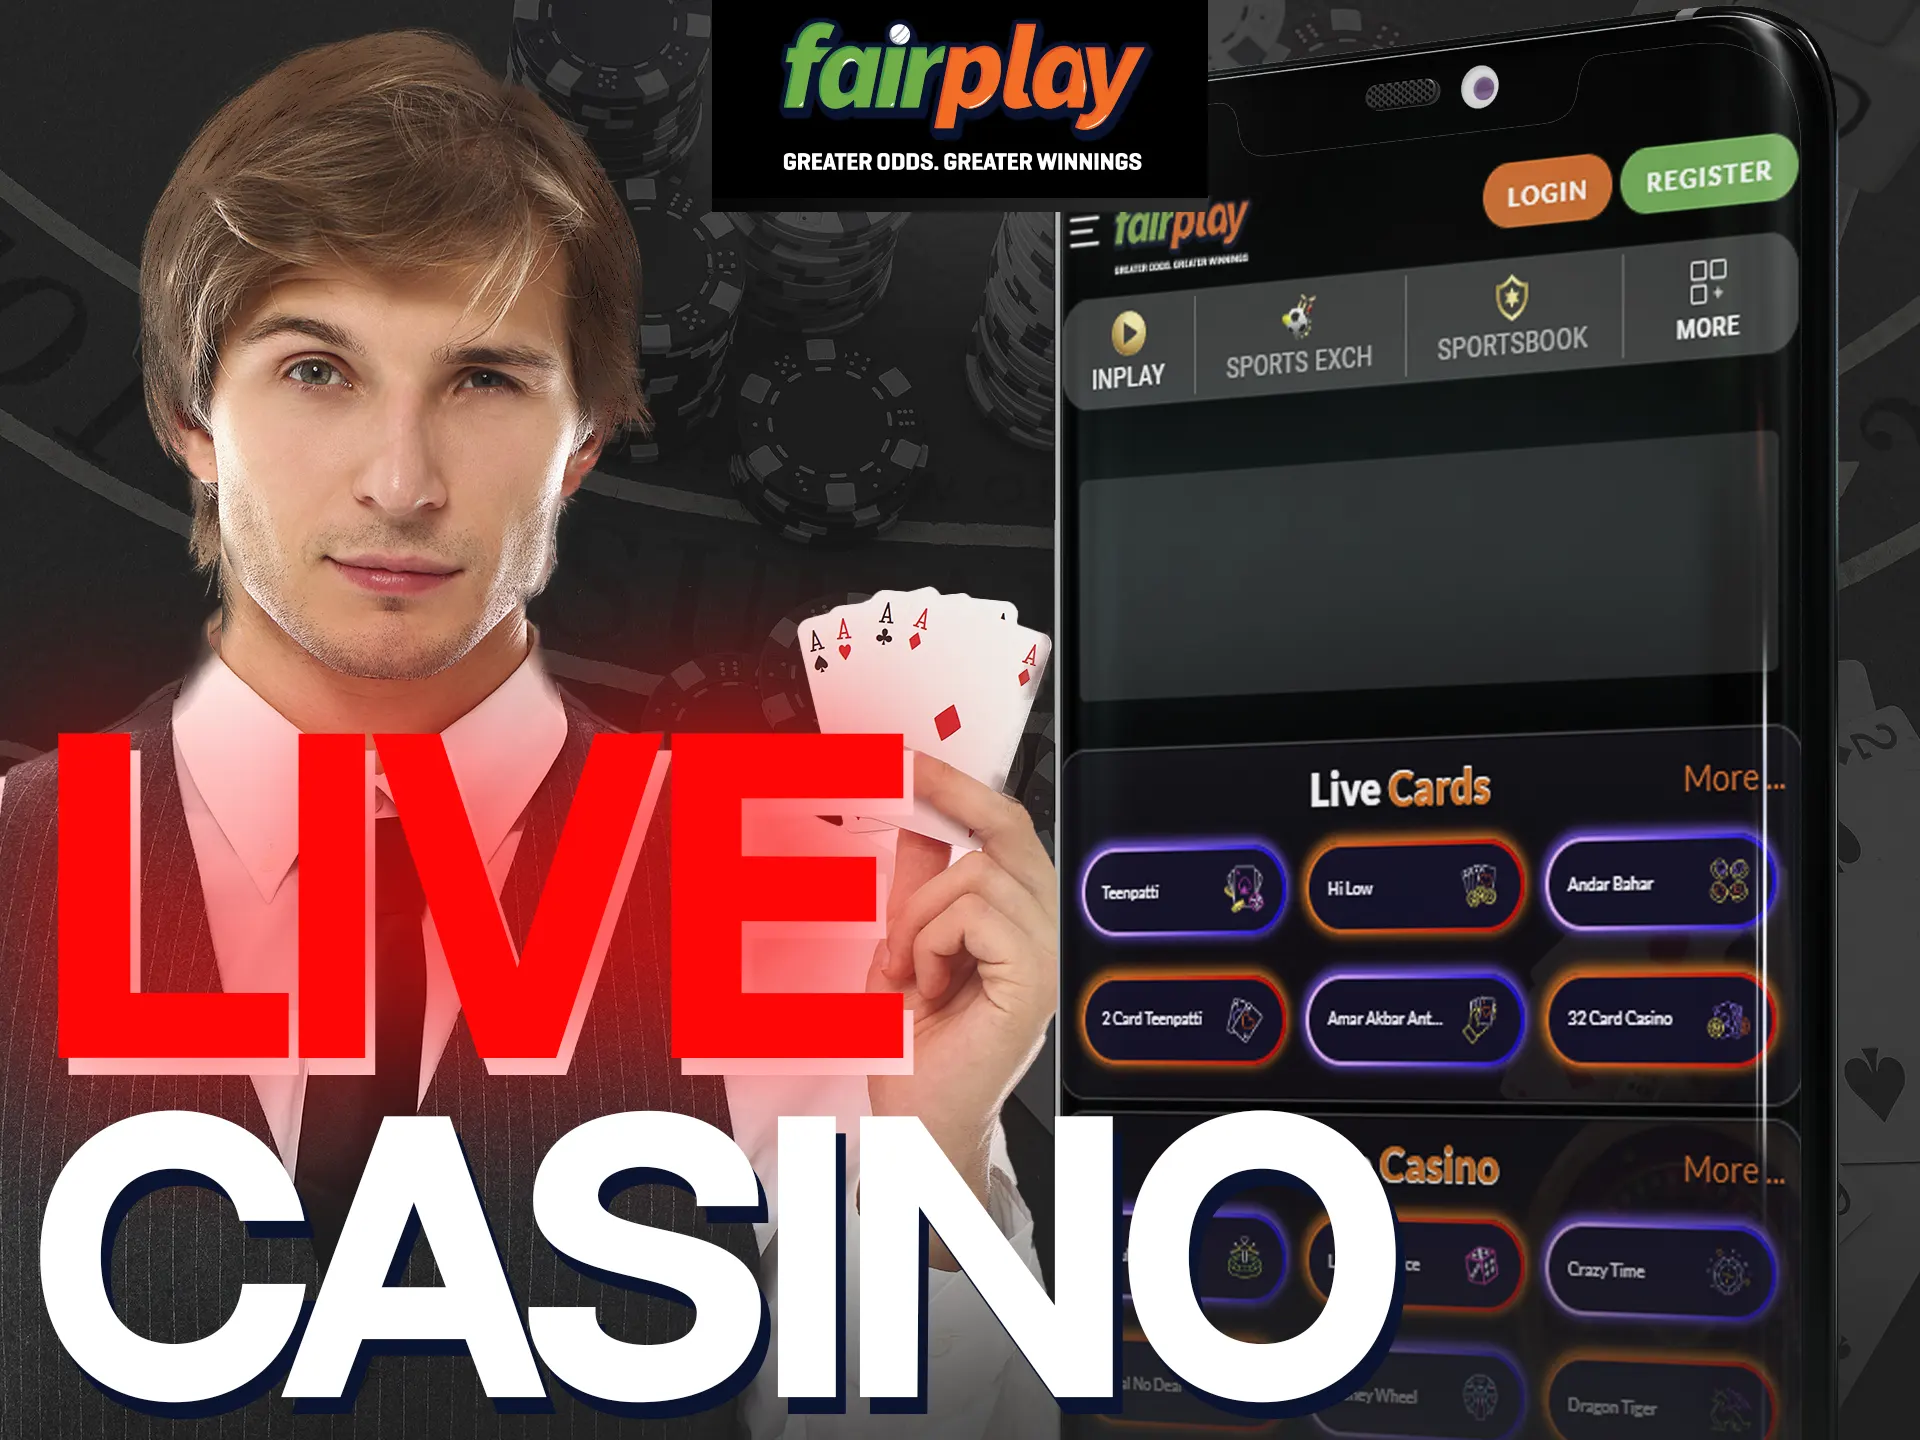 FairPlay Live Casino offers card games like baccarat, blackjack, poker with live dealers.